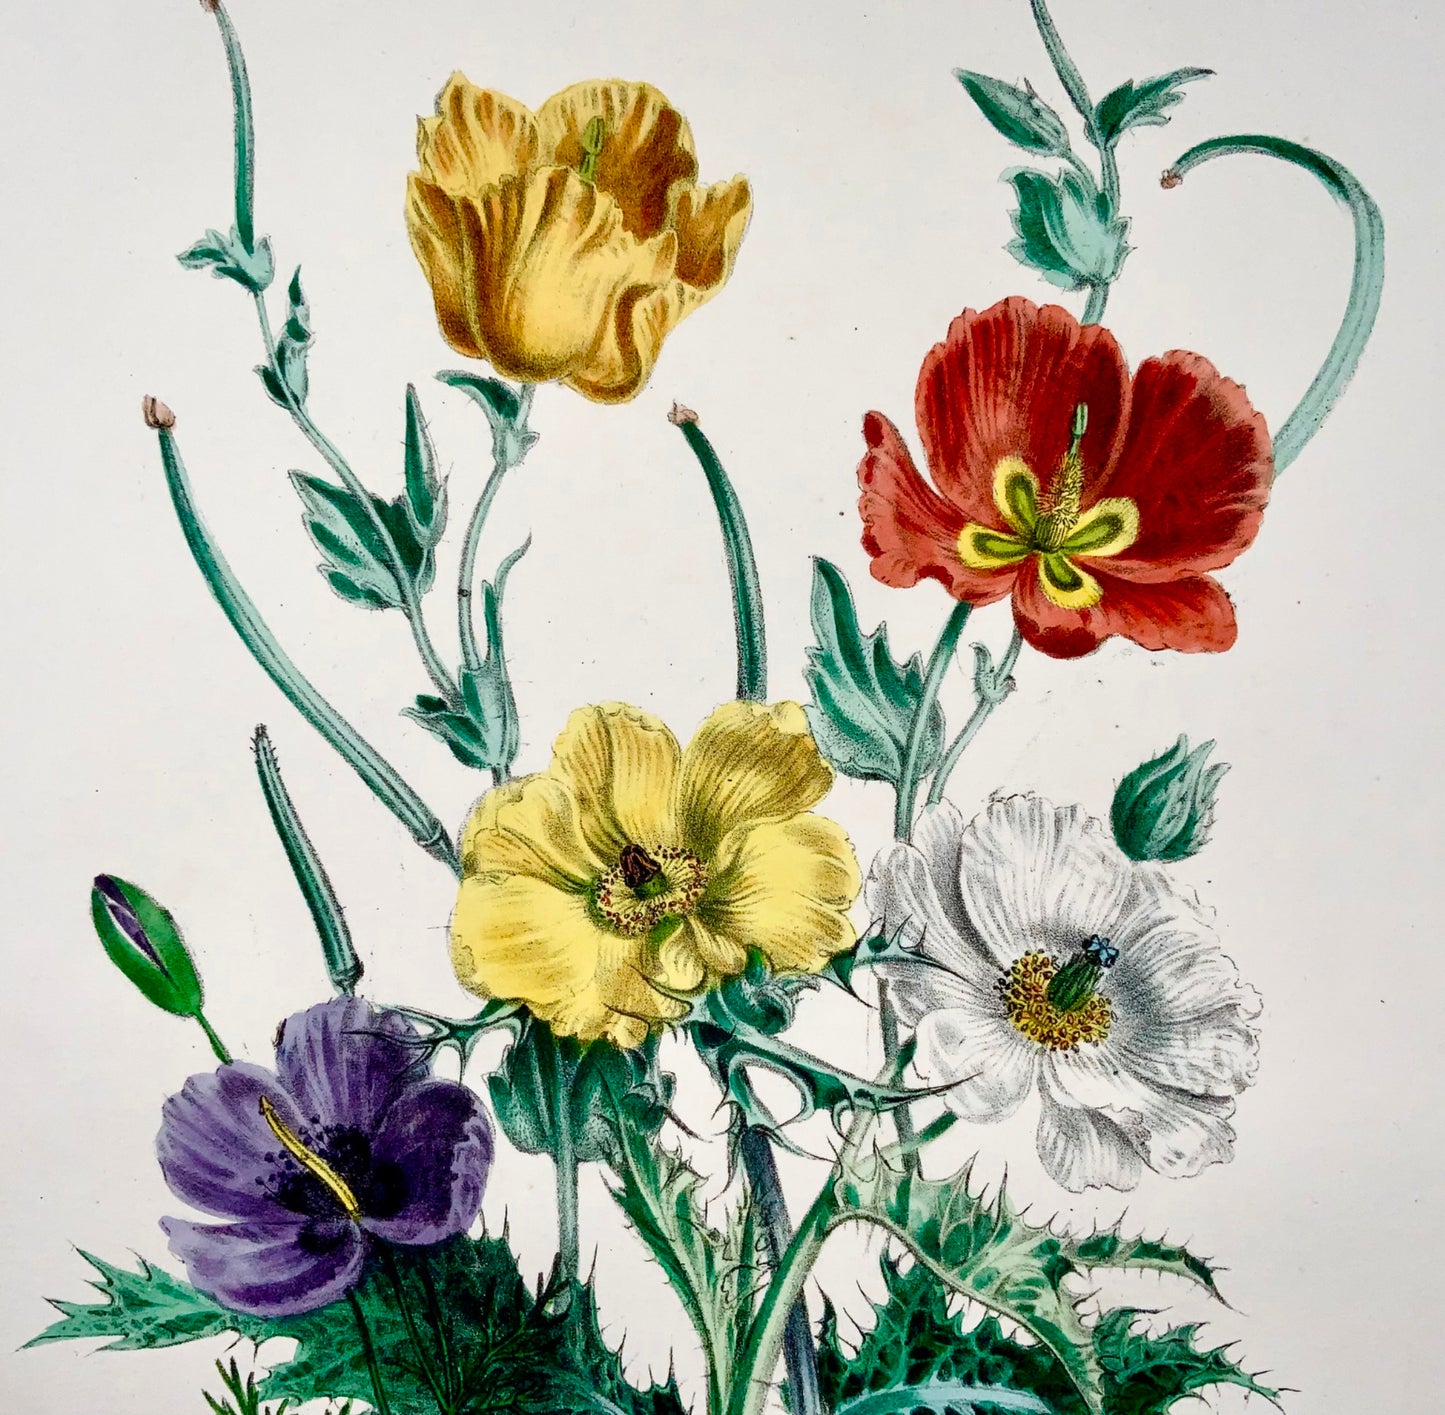 1841 Jane Loudon, Exotic Poppies, hand hand coloured lithograph, bouquet of flowers